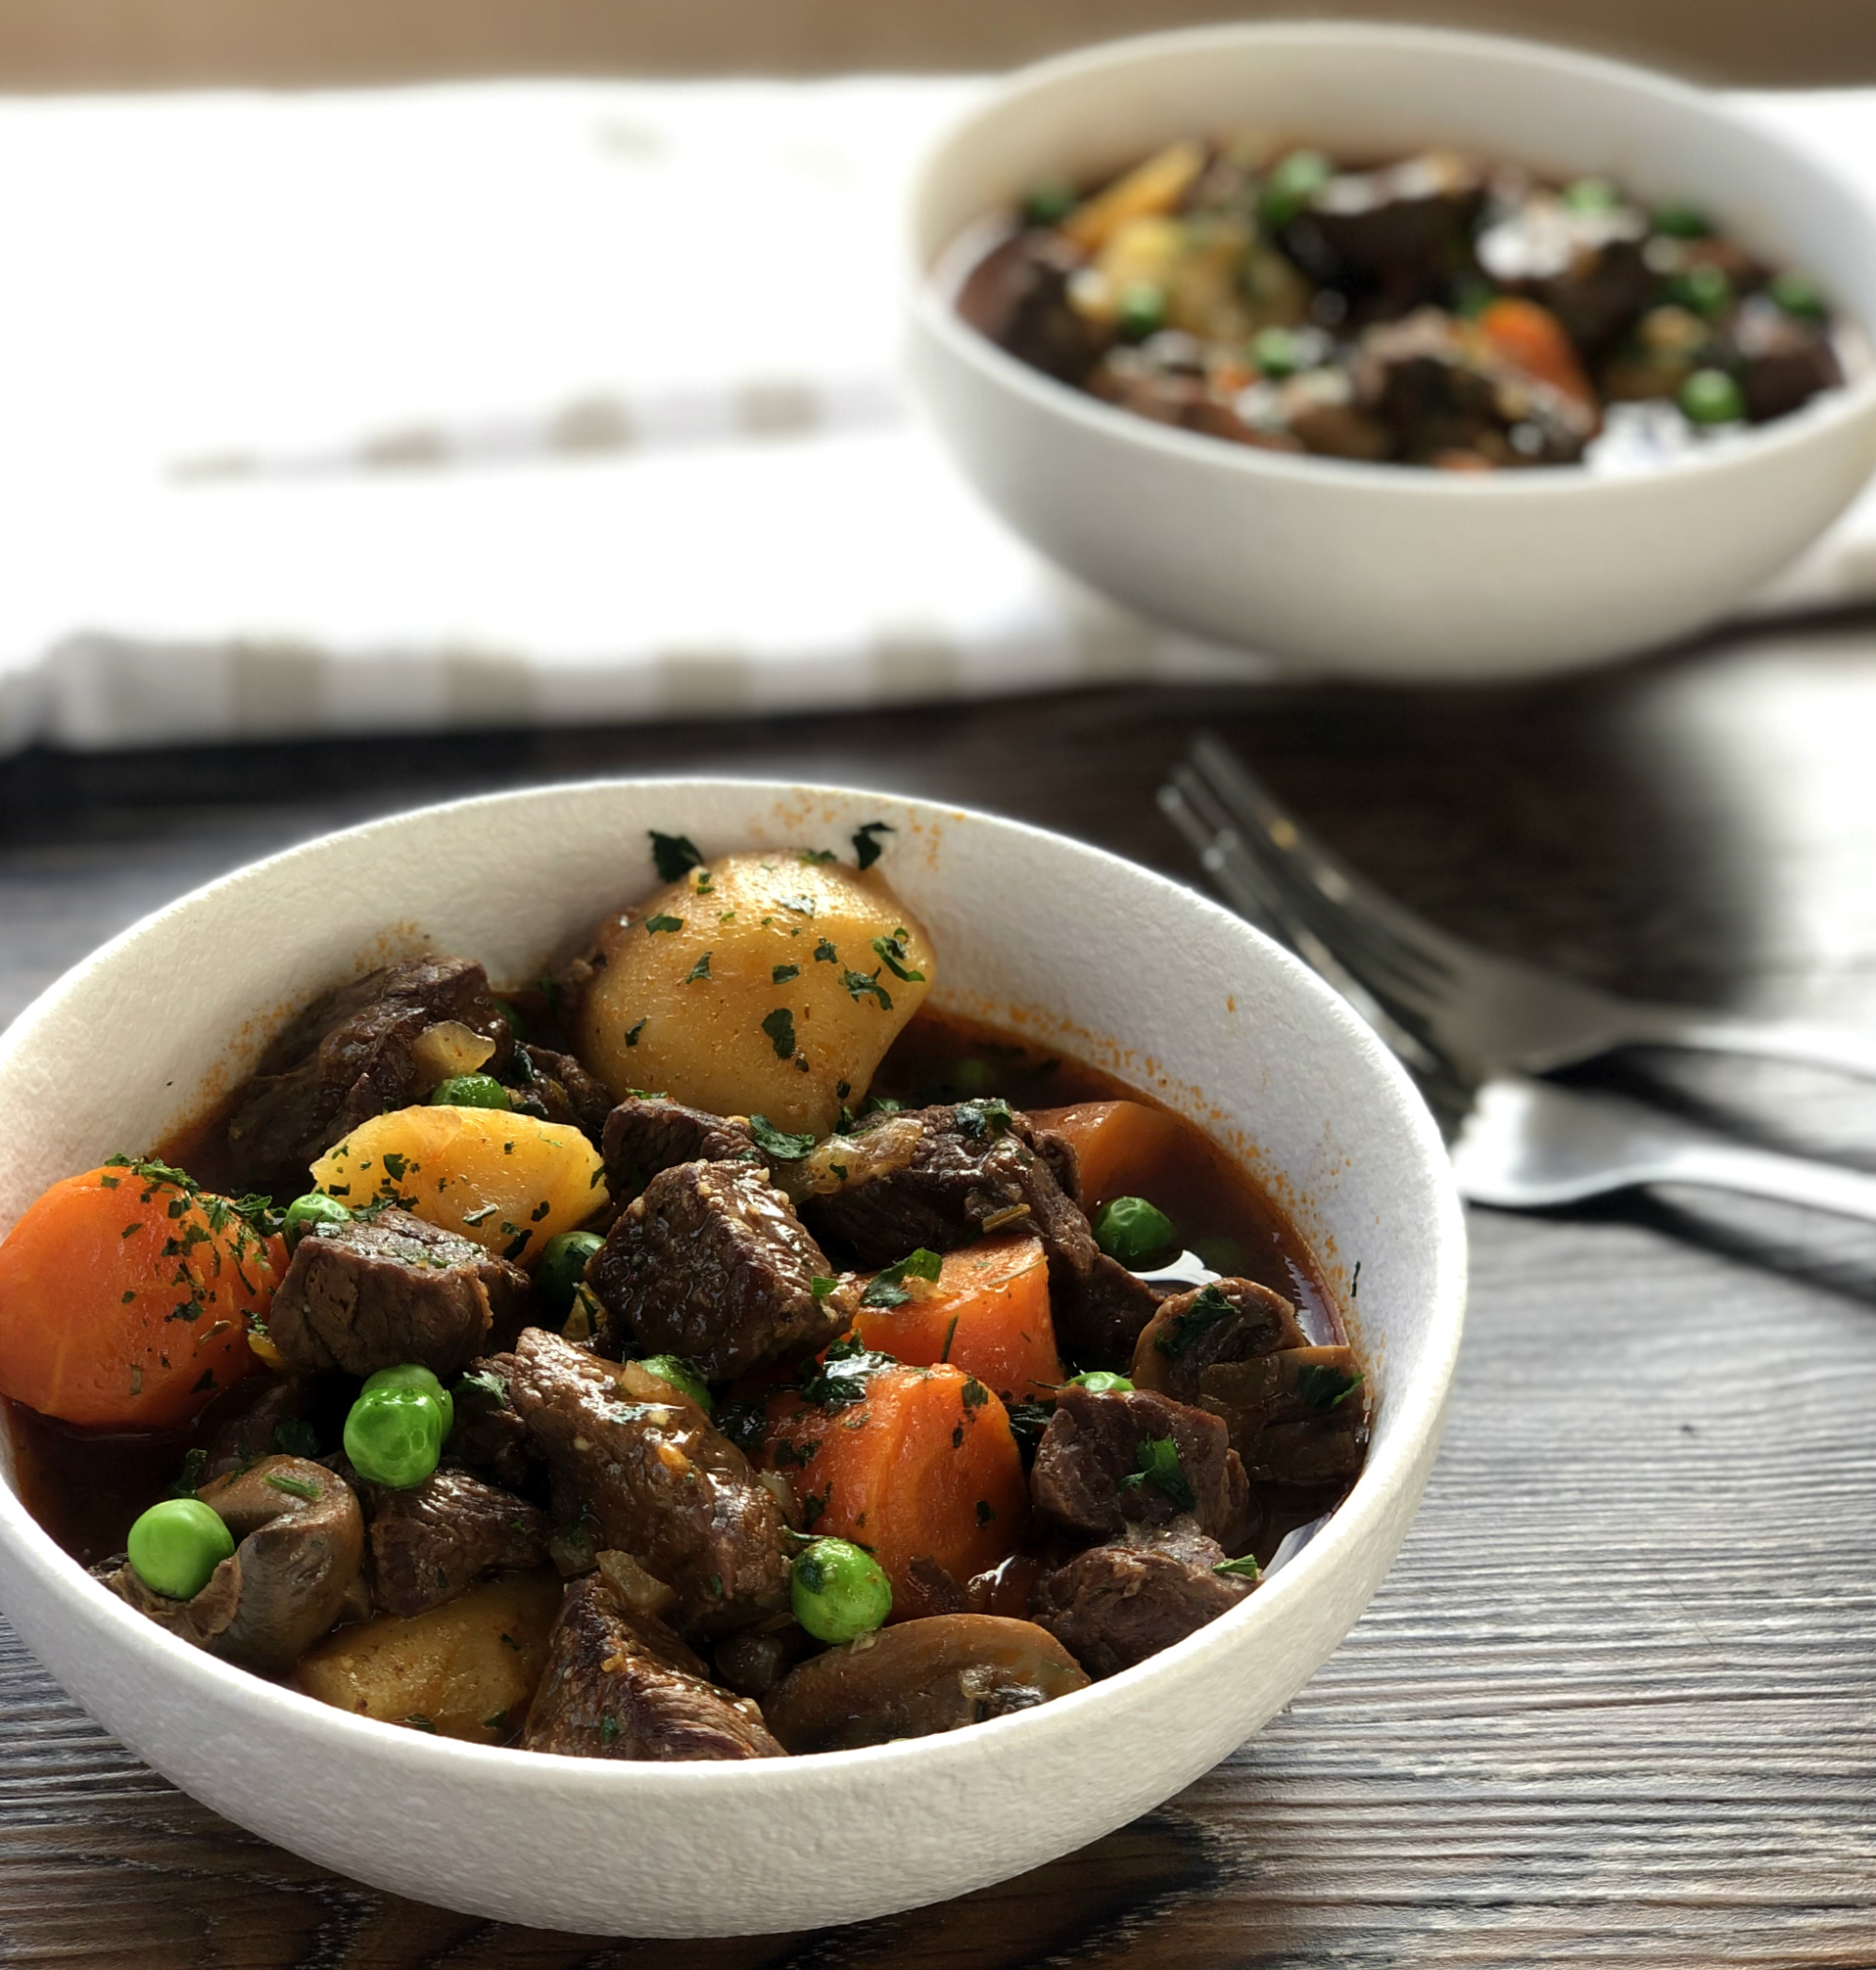 Bowls of Slow Cooker Beef Stew with veges